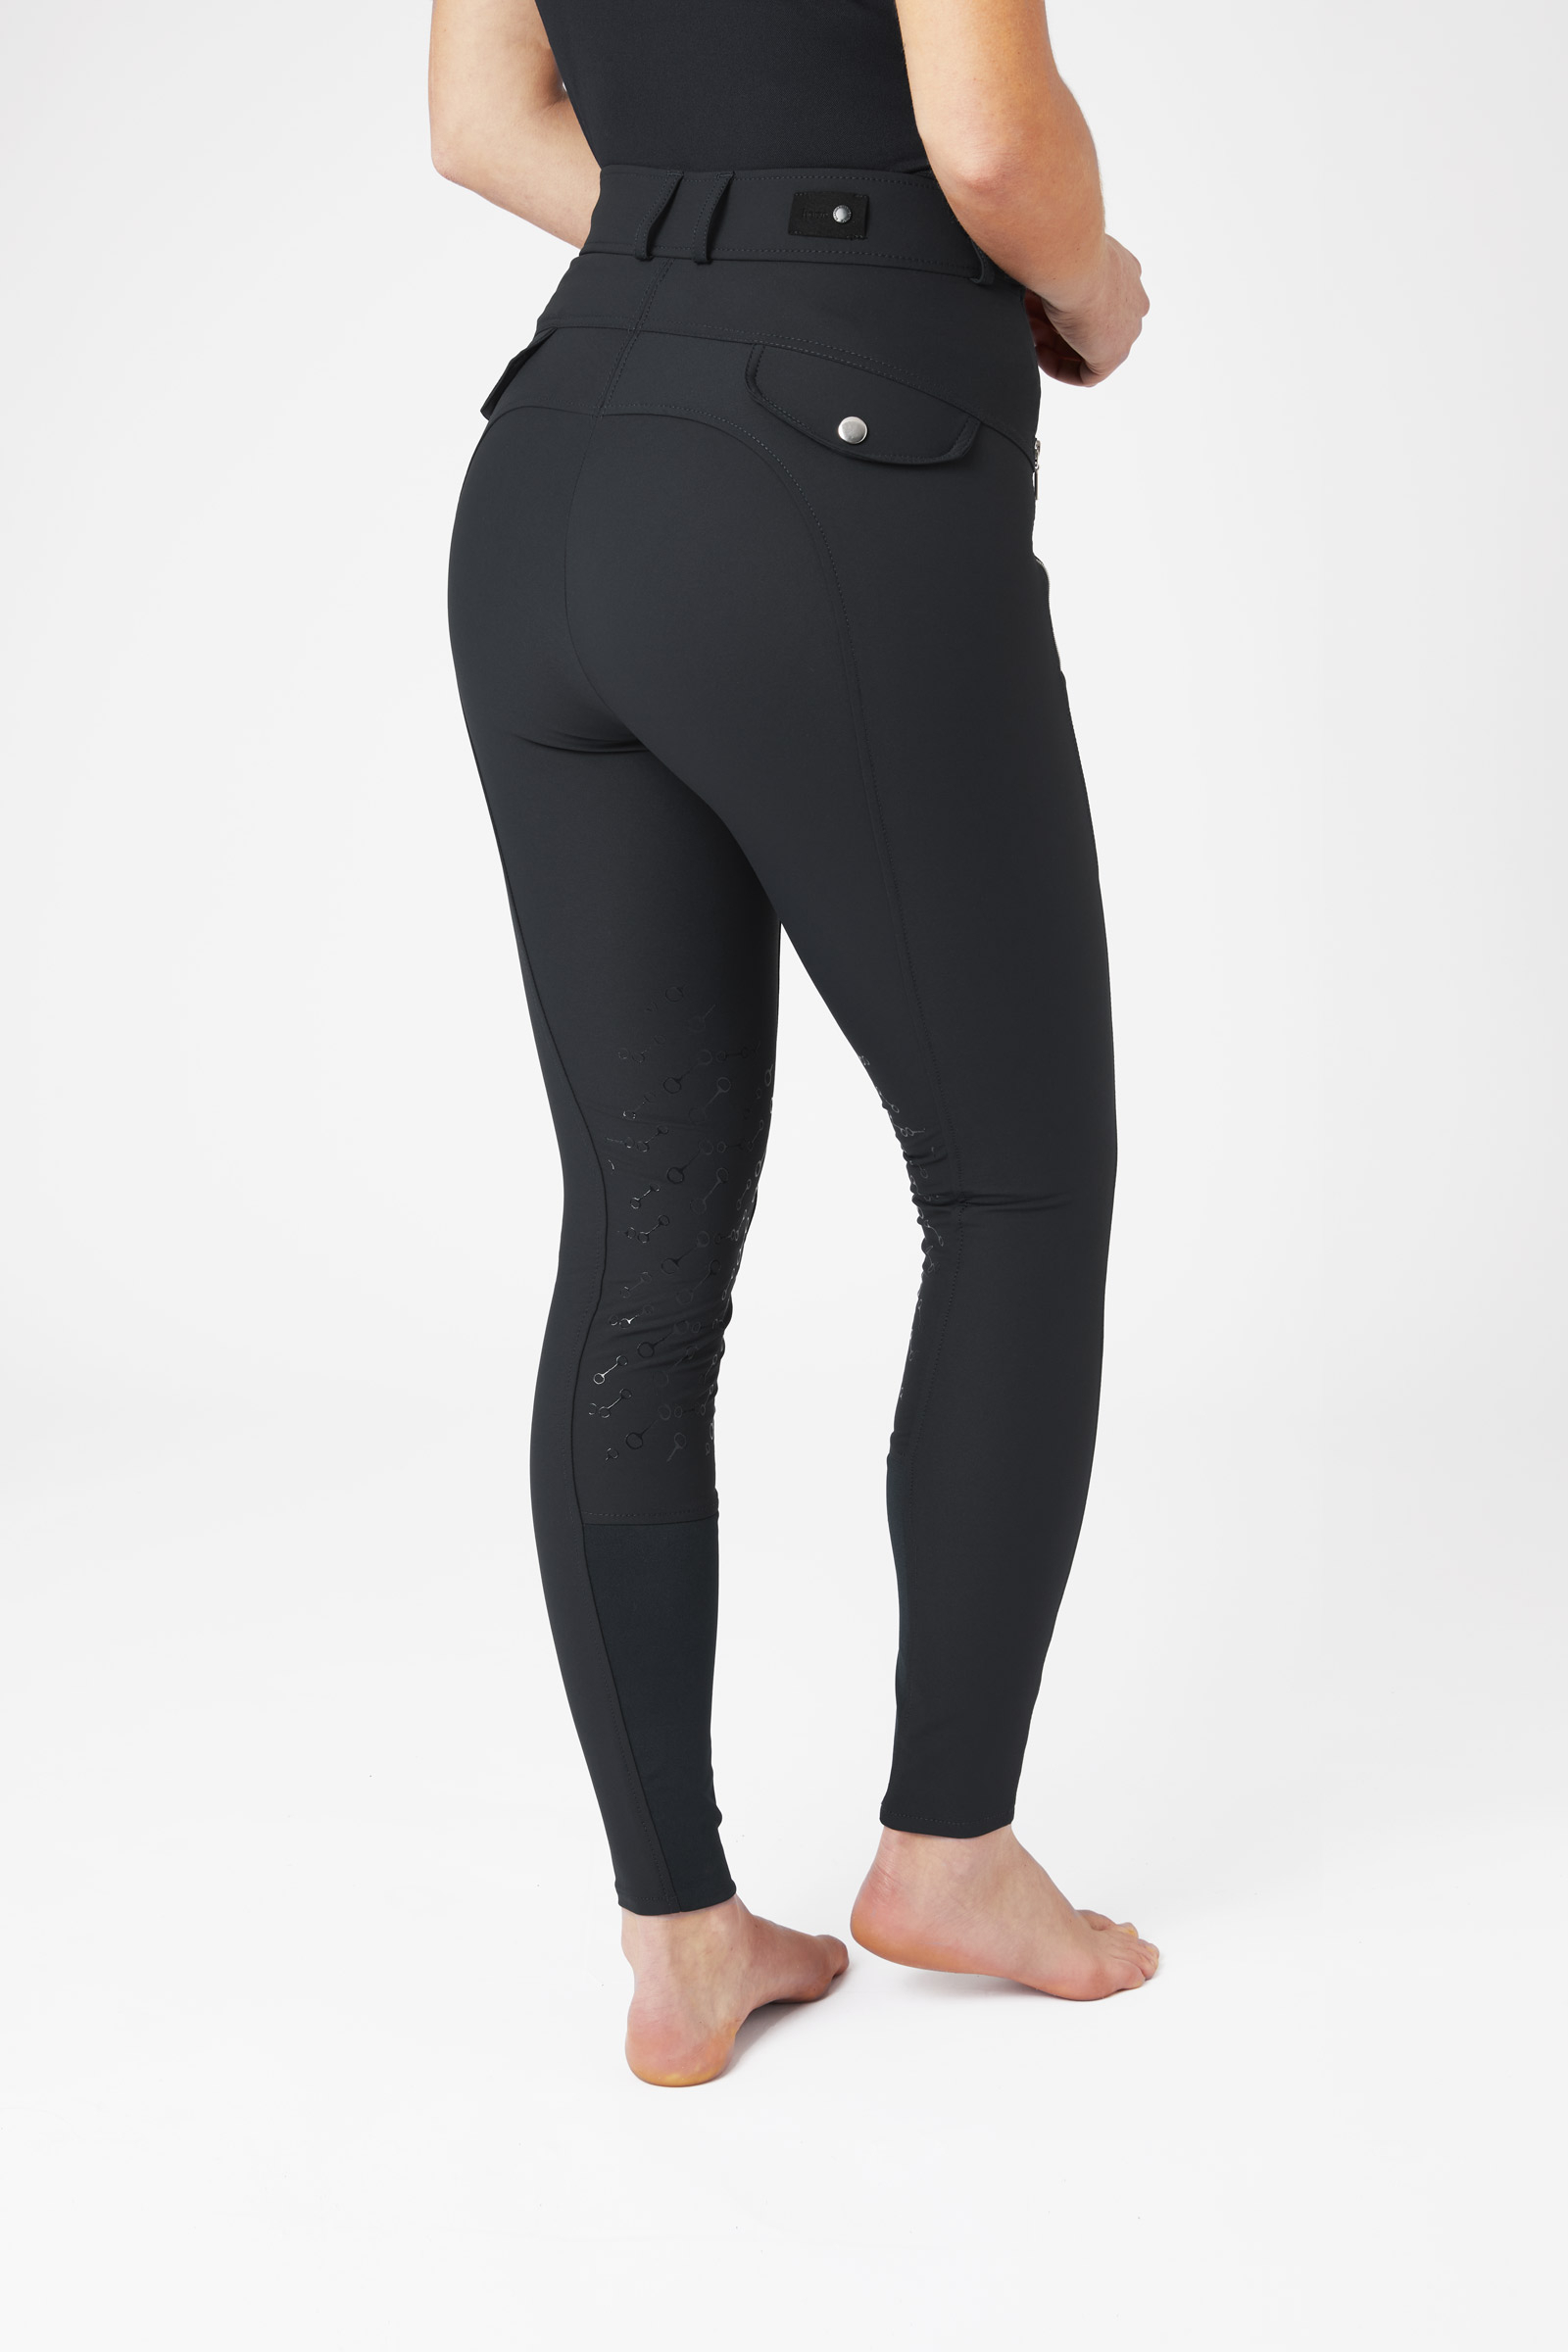 Buy Horze Andrea High Waist Silicone Knee Patch Breeches for Woman